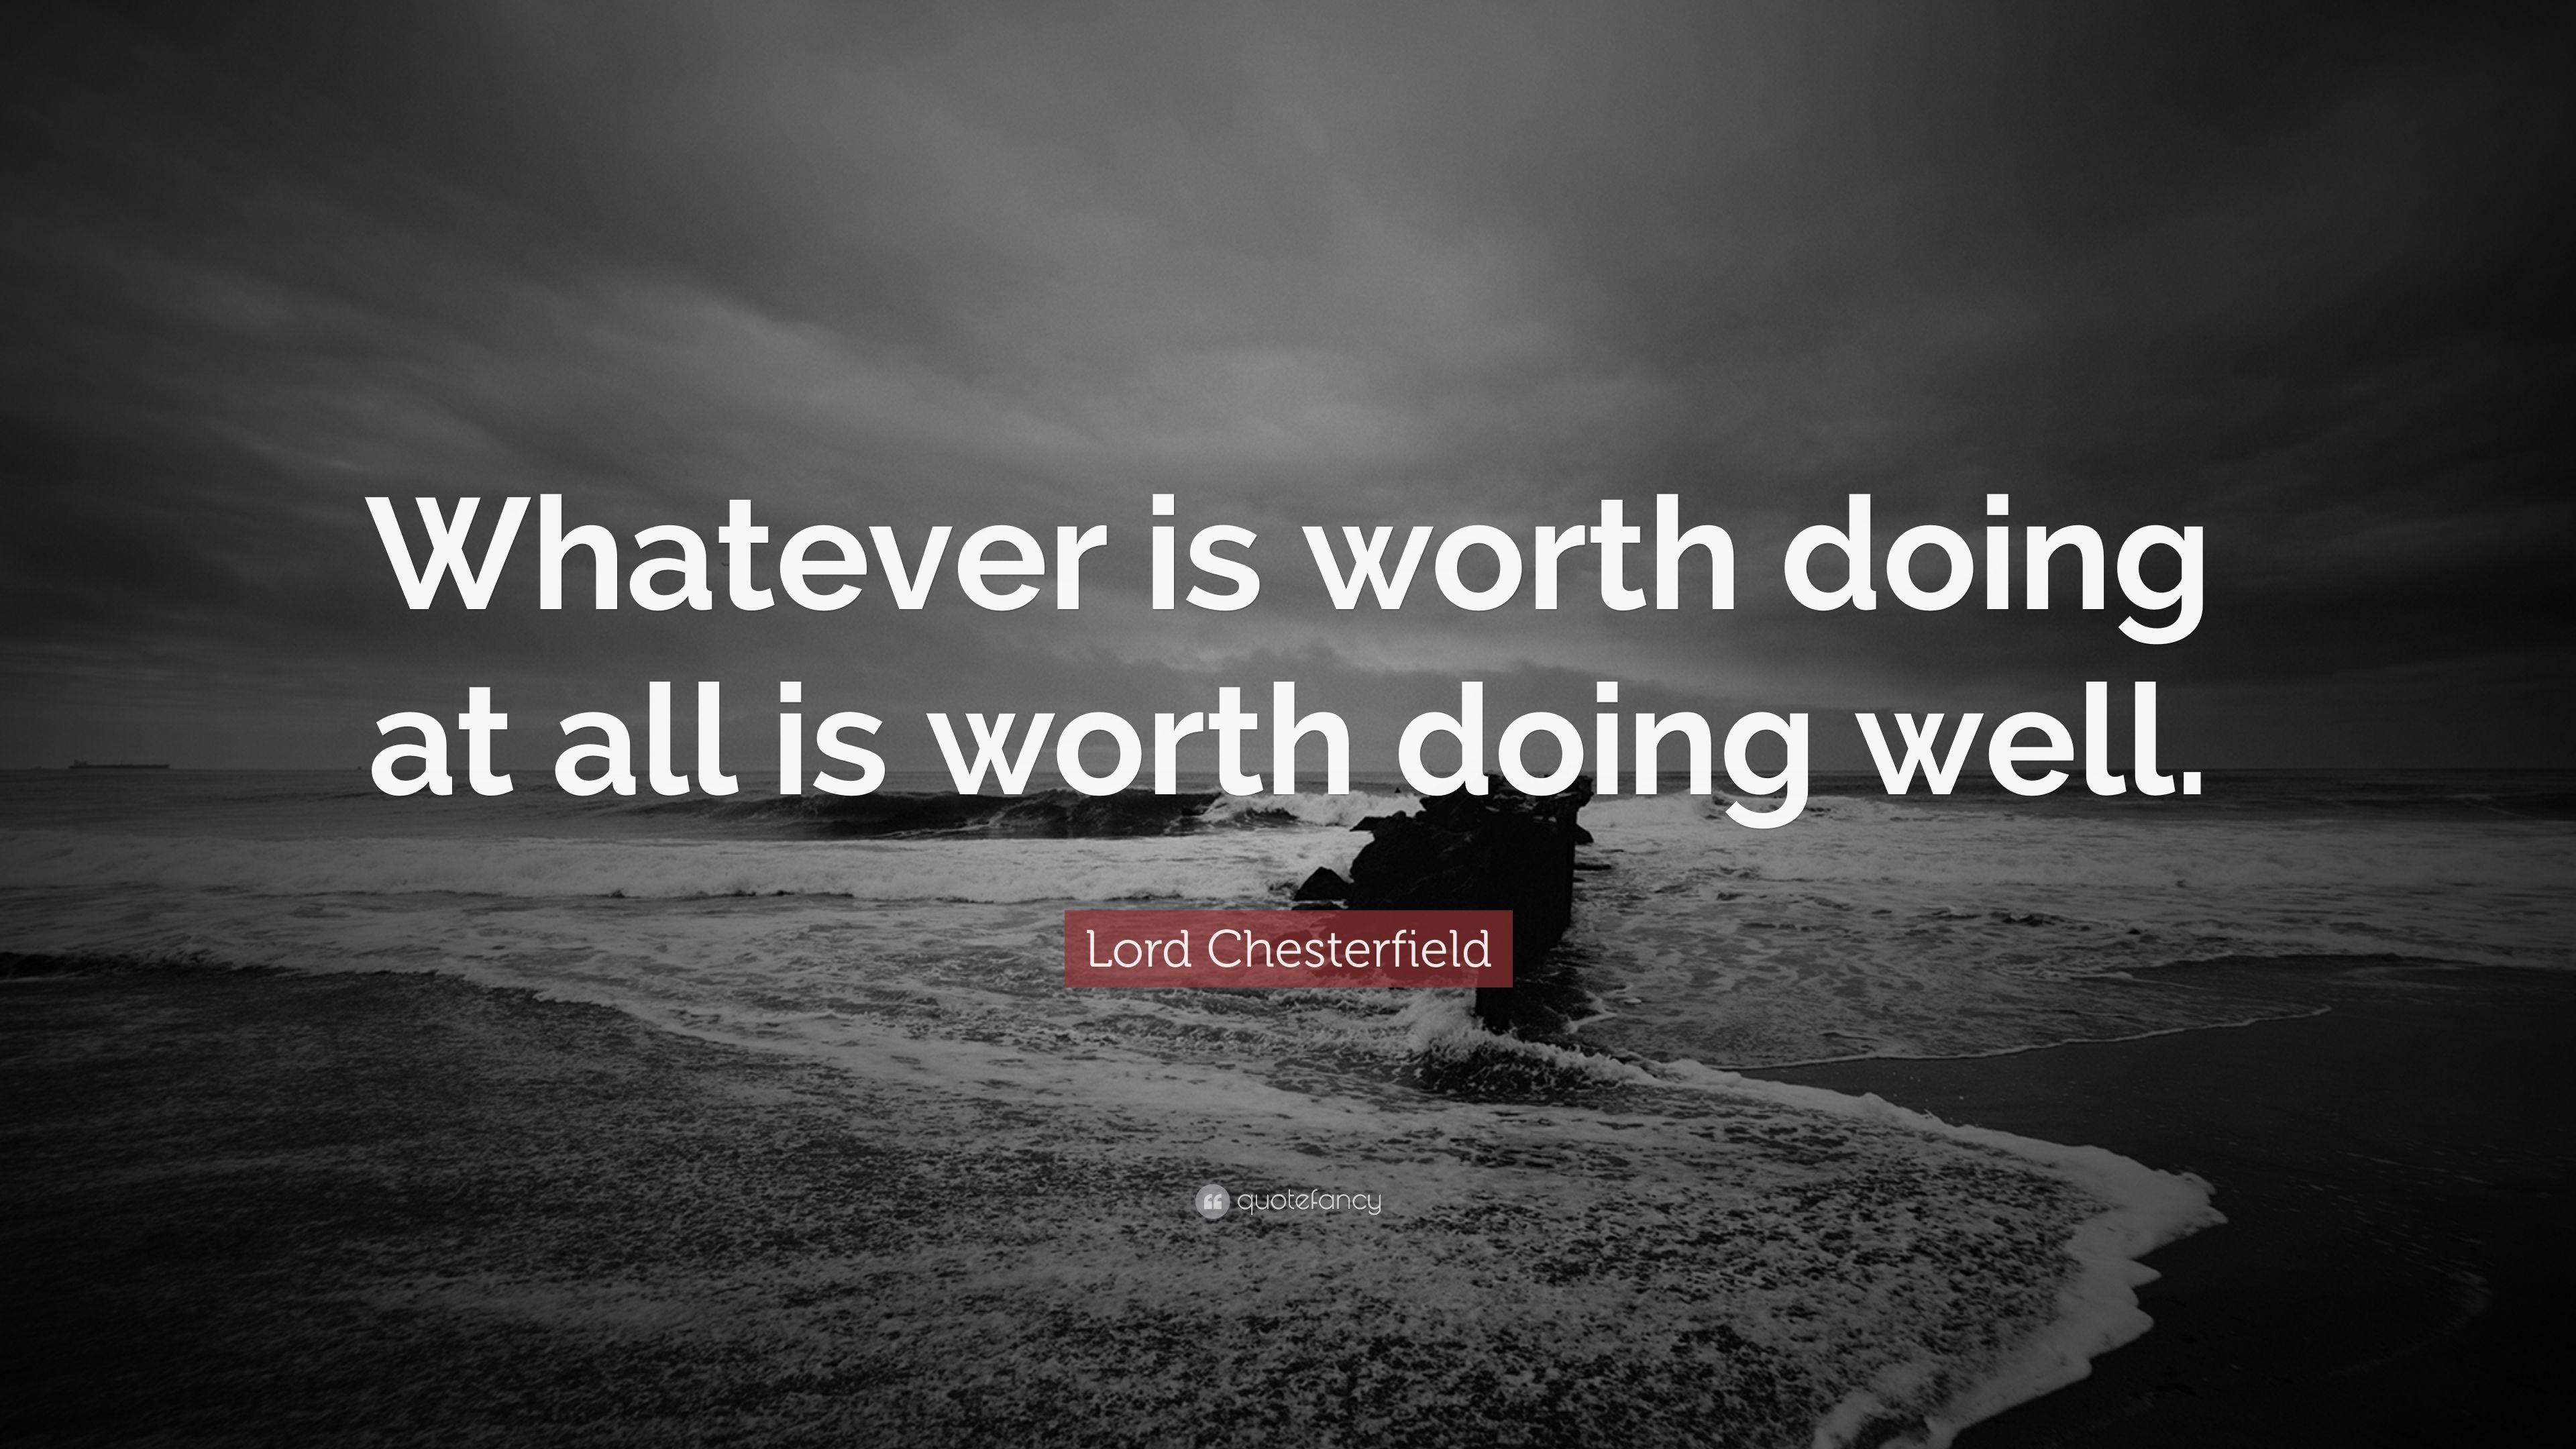 Lord Chesterfield Quote: “Whatever is worth doing at all is worth